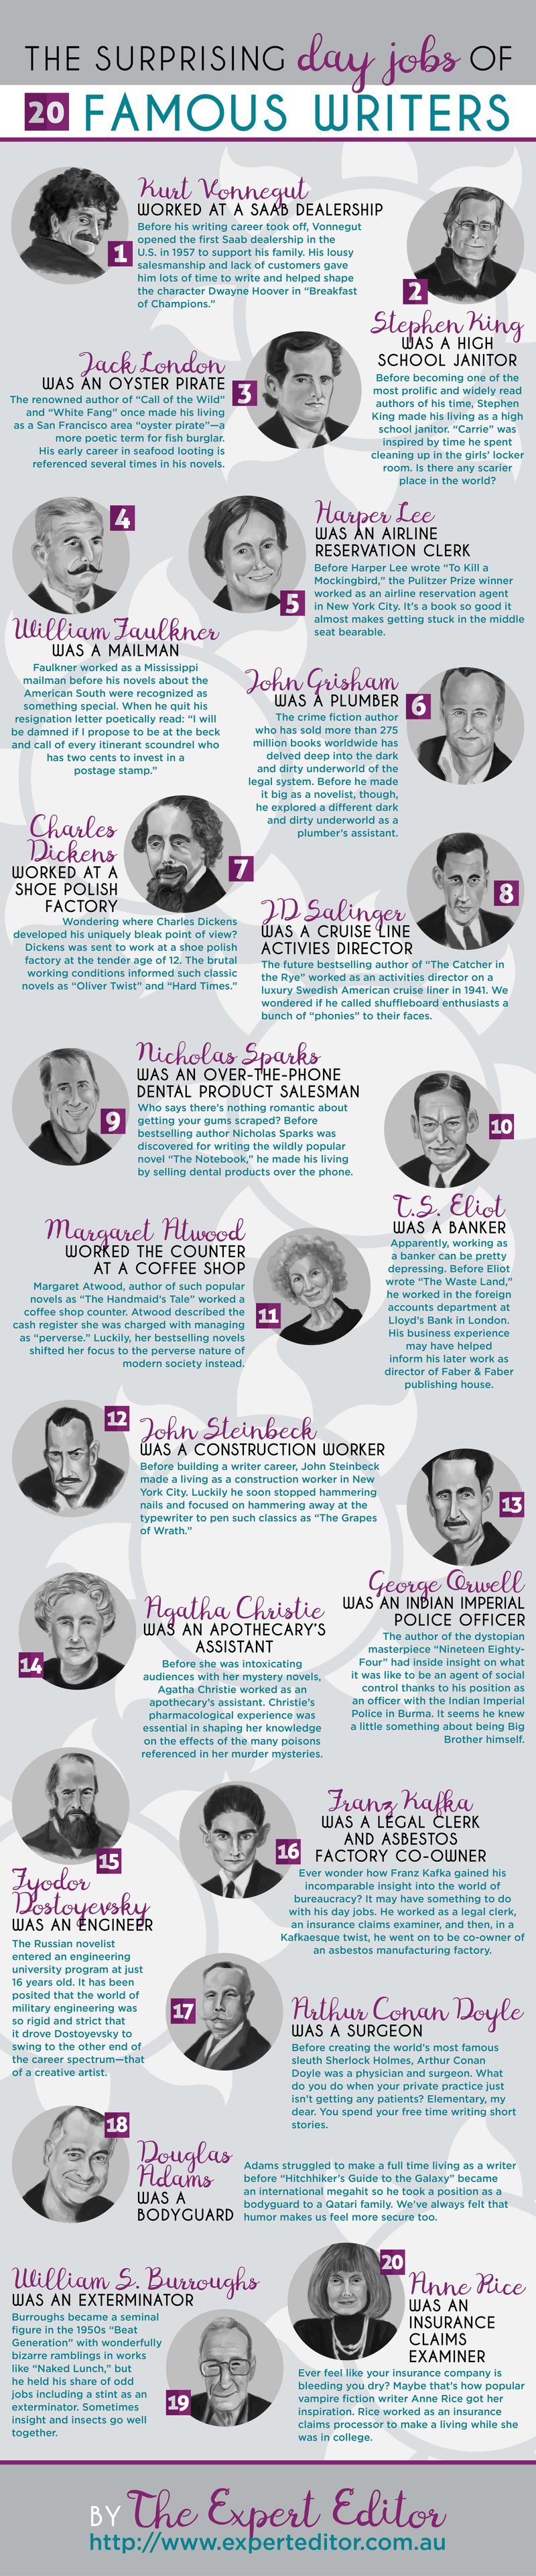 Surprising-day-jobs-of-writers-infographic